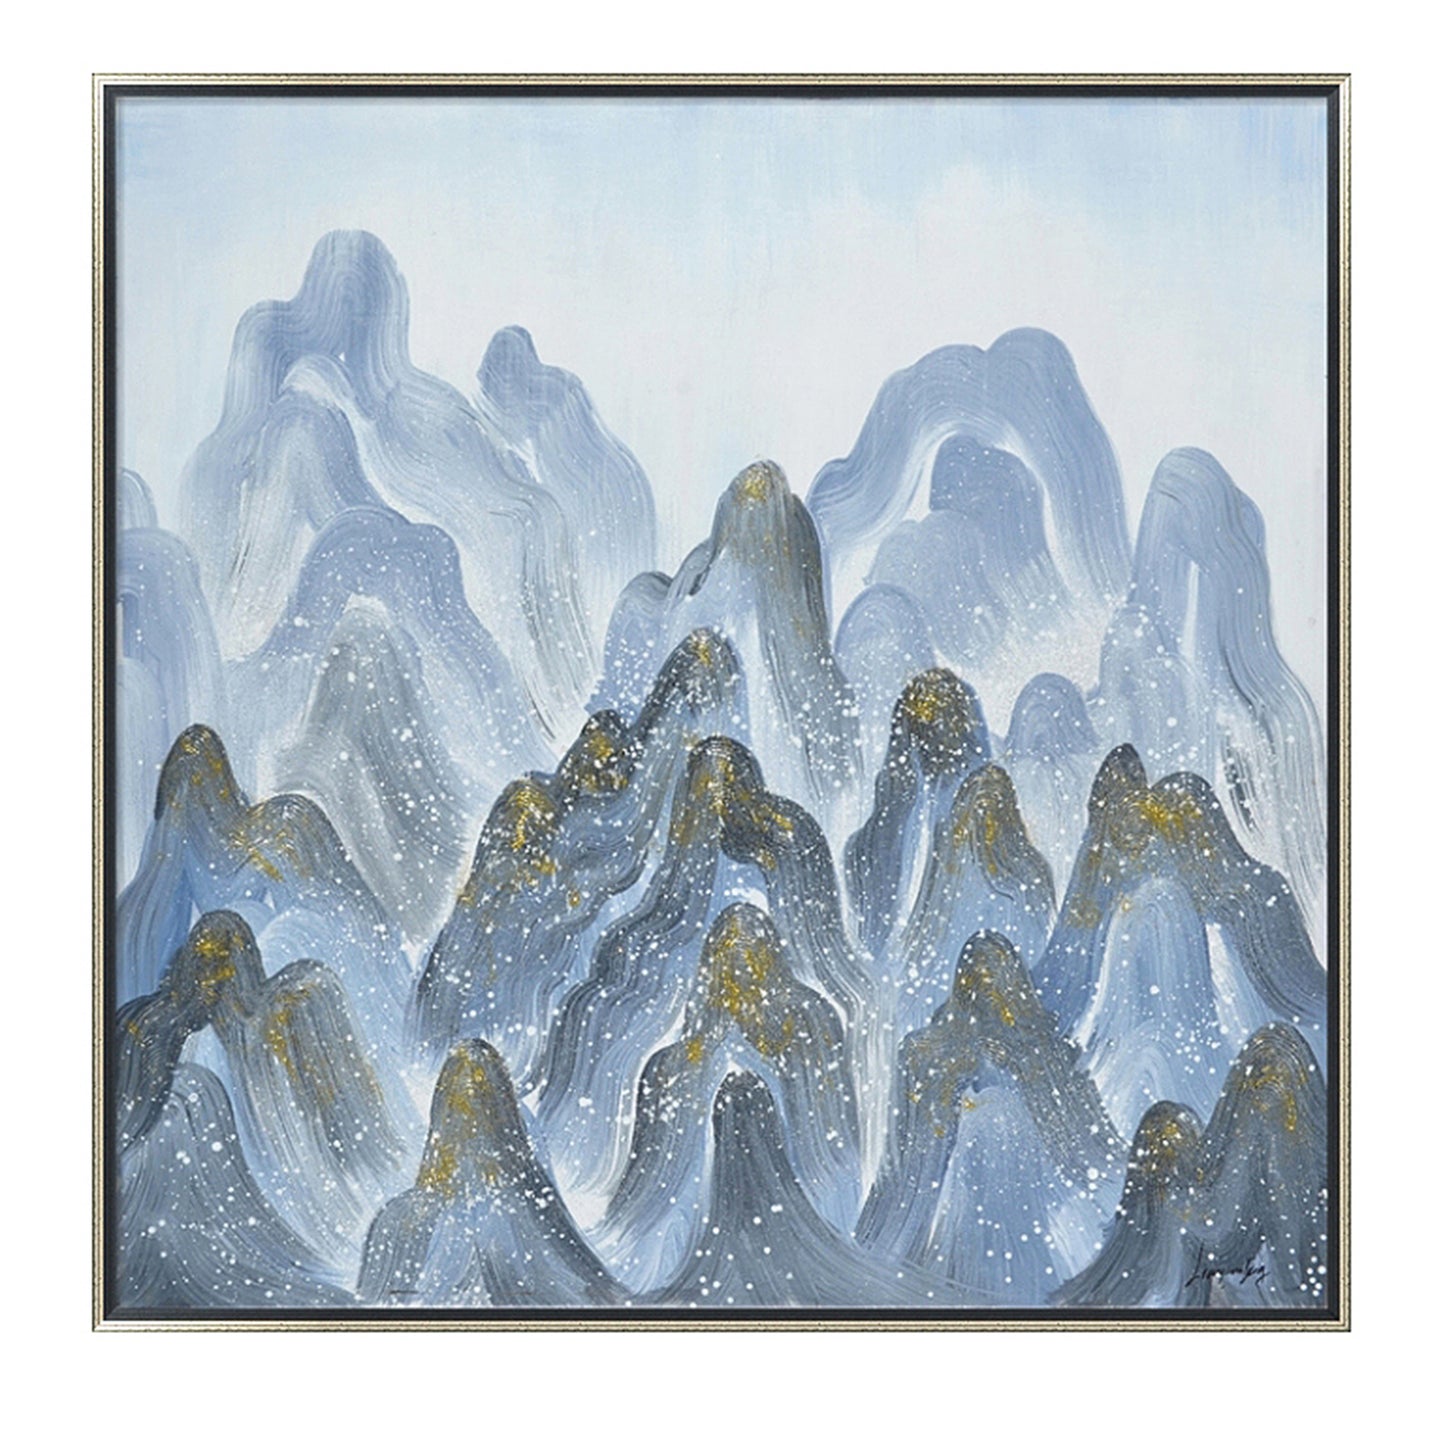 Hand Painted Acrylic Wall Art Blue Mountains on a 39 x 39 Square Canvas with a Silver Wooden Frame